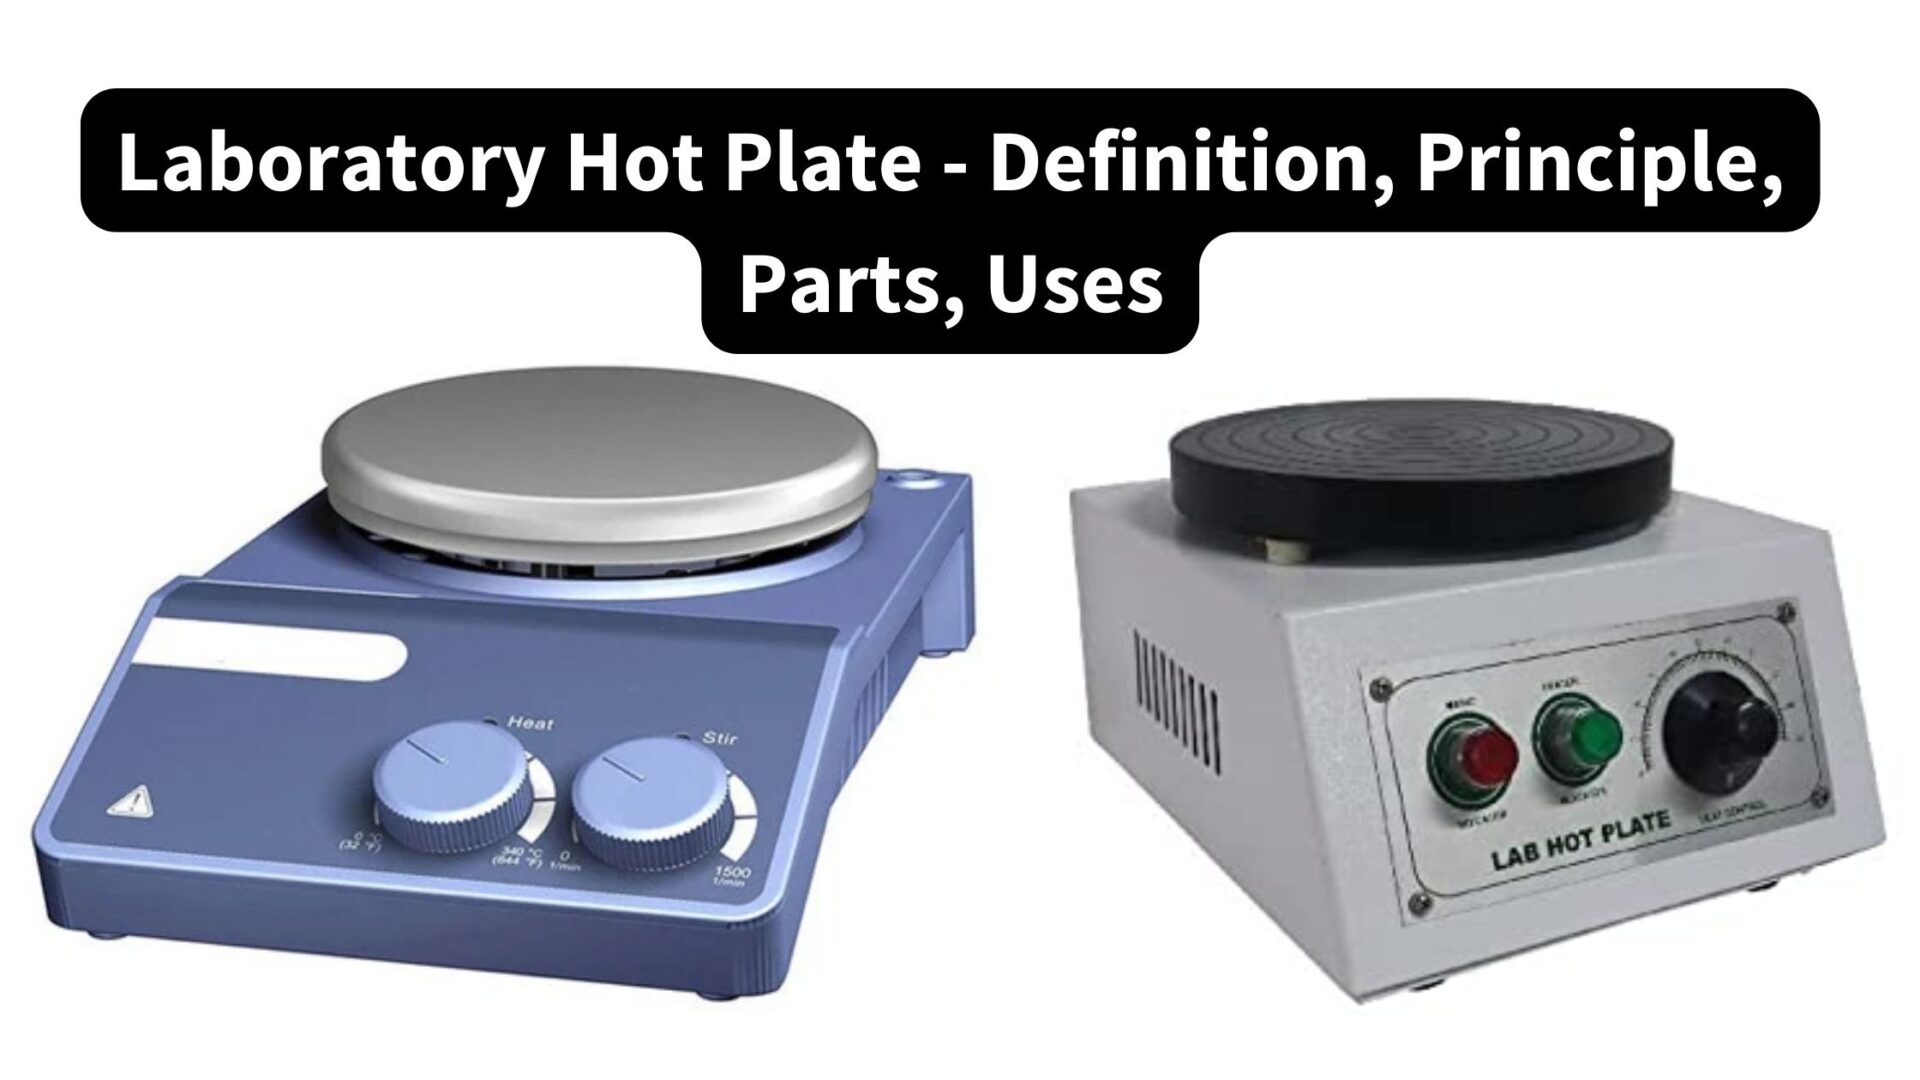 Laboratory Hot Plate -  Definition, Principle, Parts, Uses